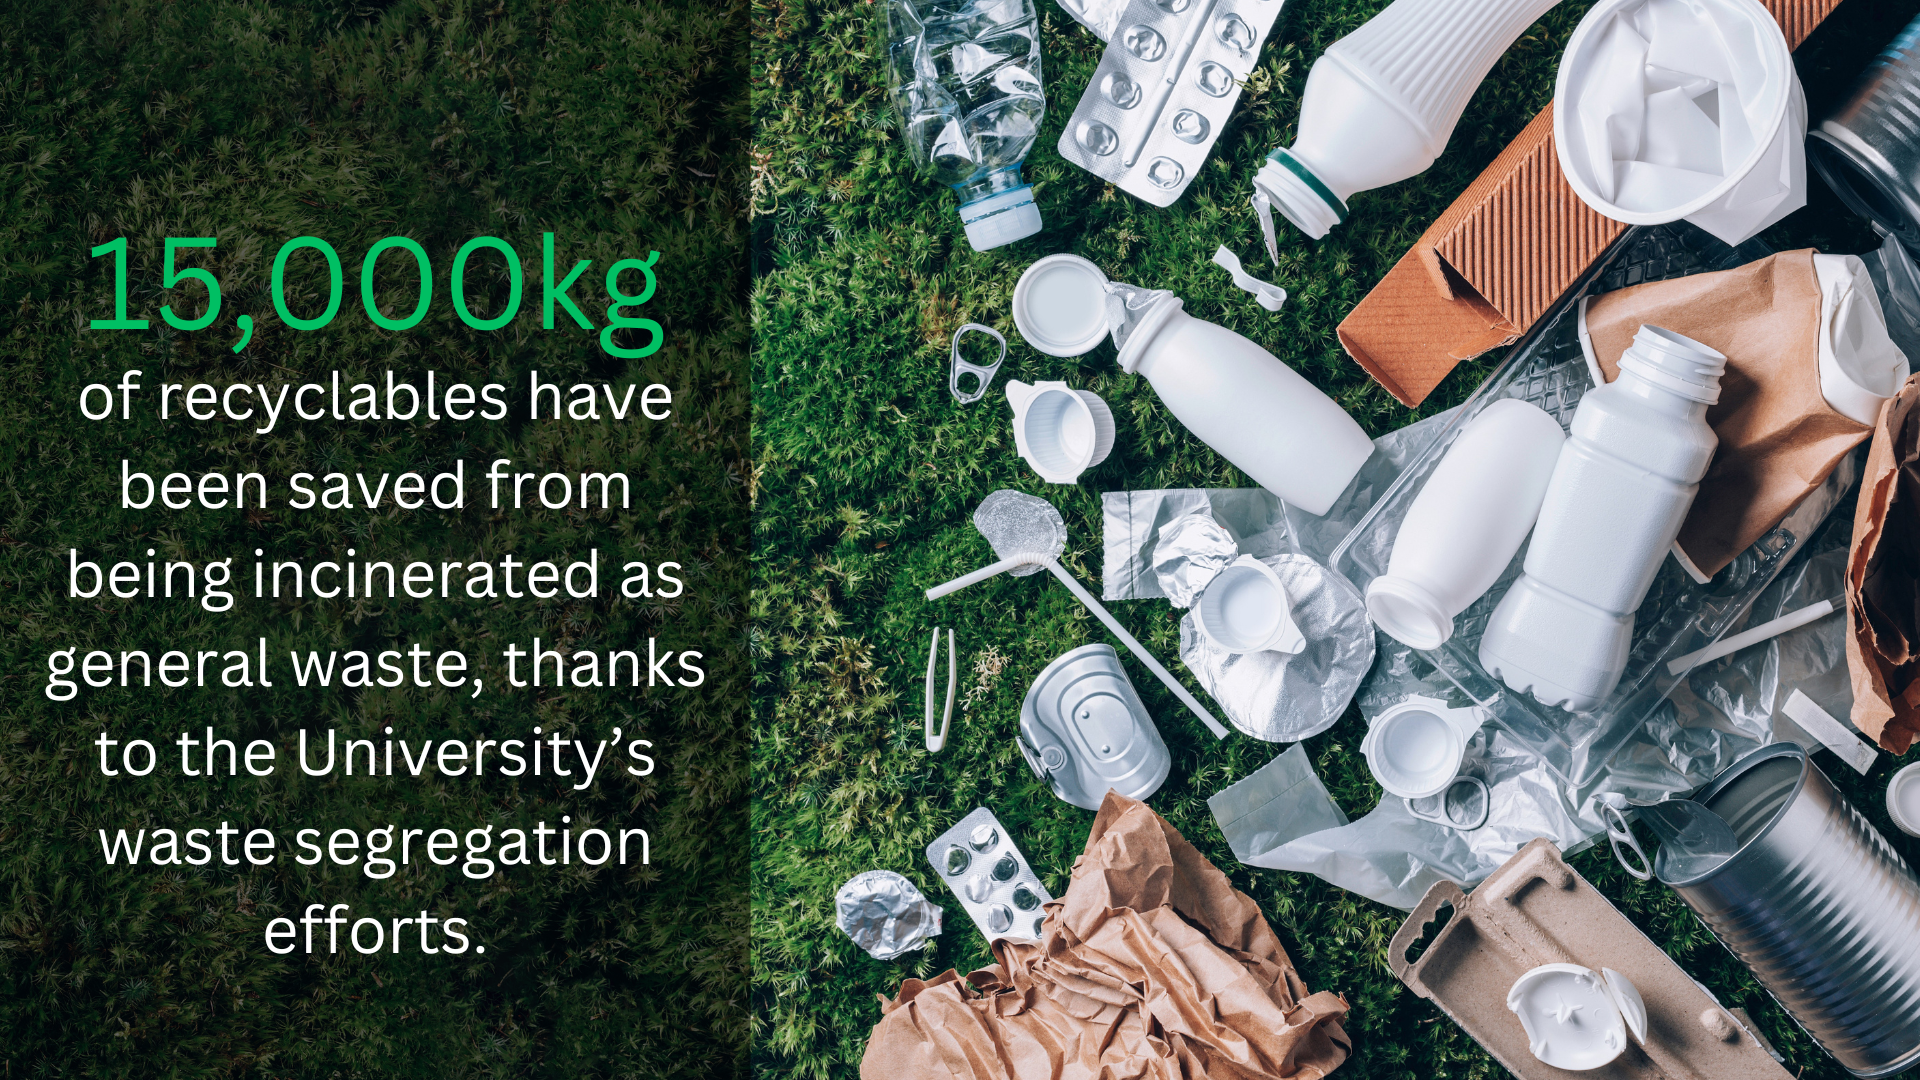 15,000kg of recyclables have been saved from being incinerated